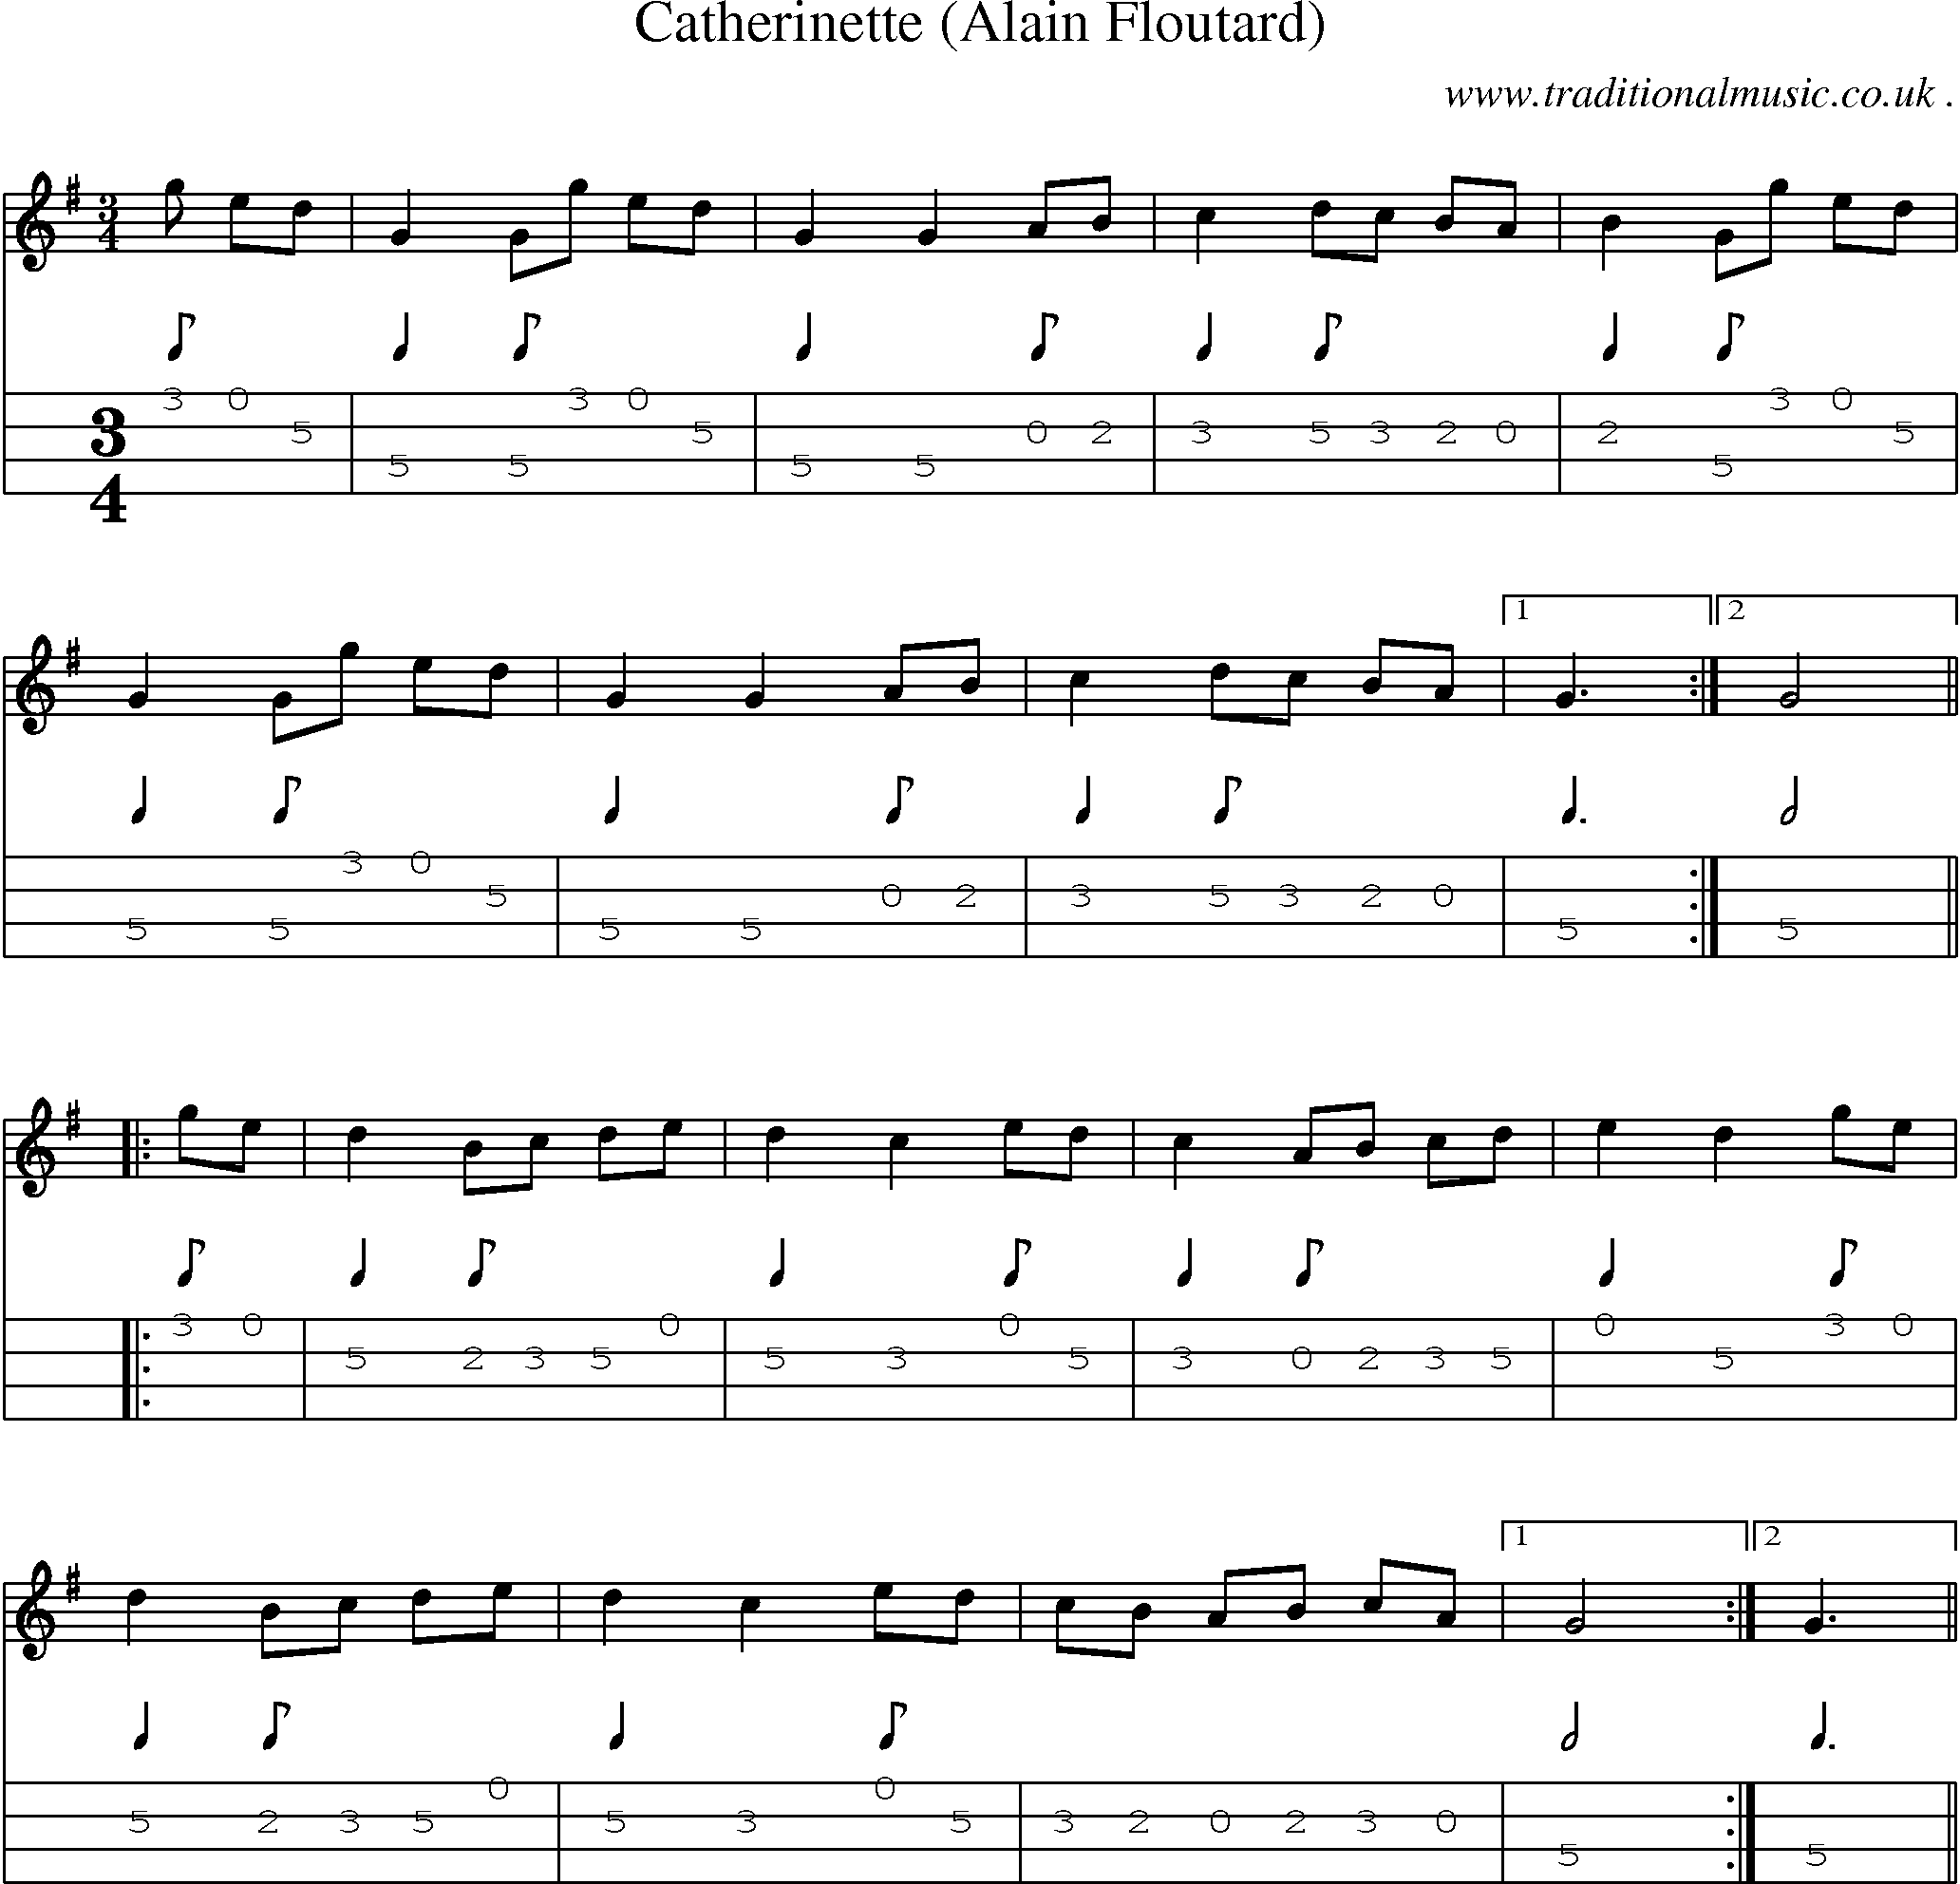 Sheet-Music and Mandolin Tabs for Catherinette (alain Floutard)